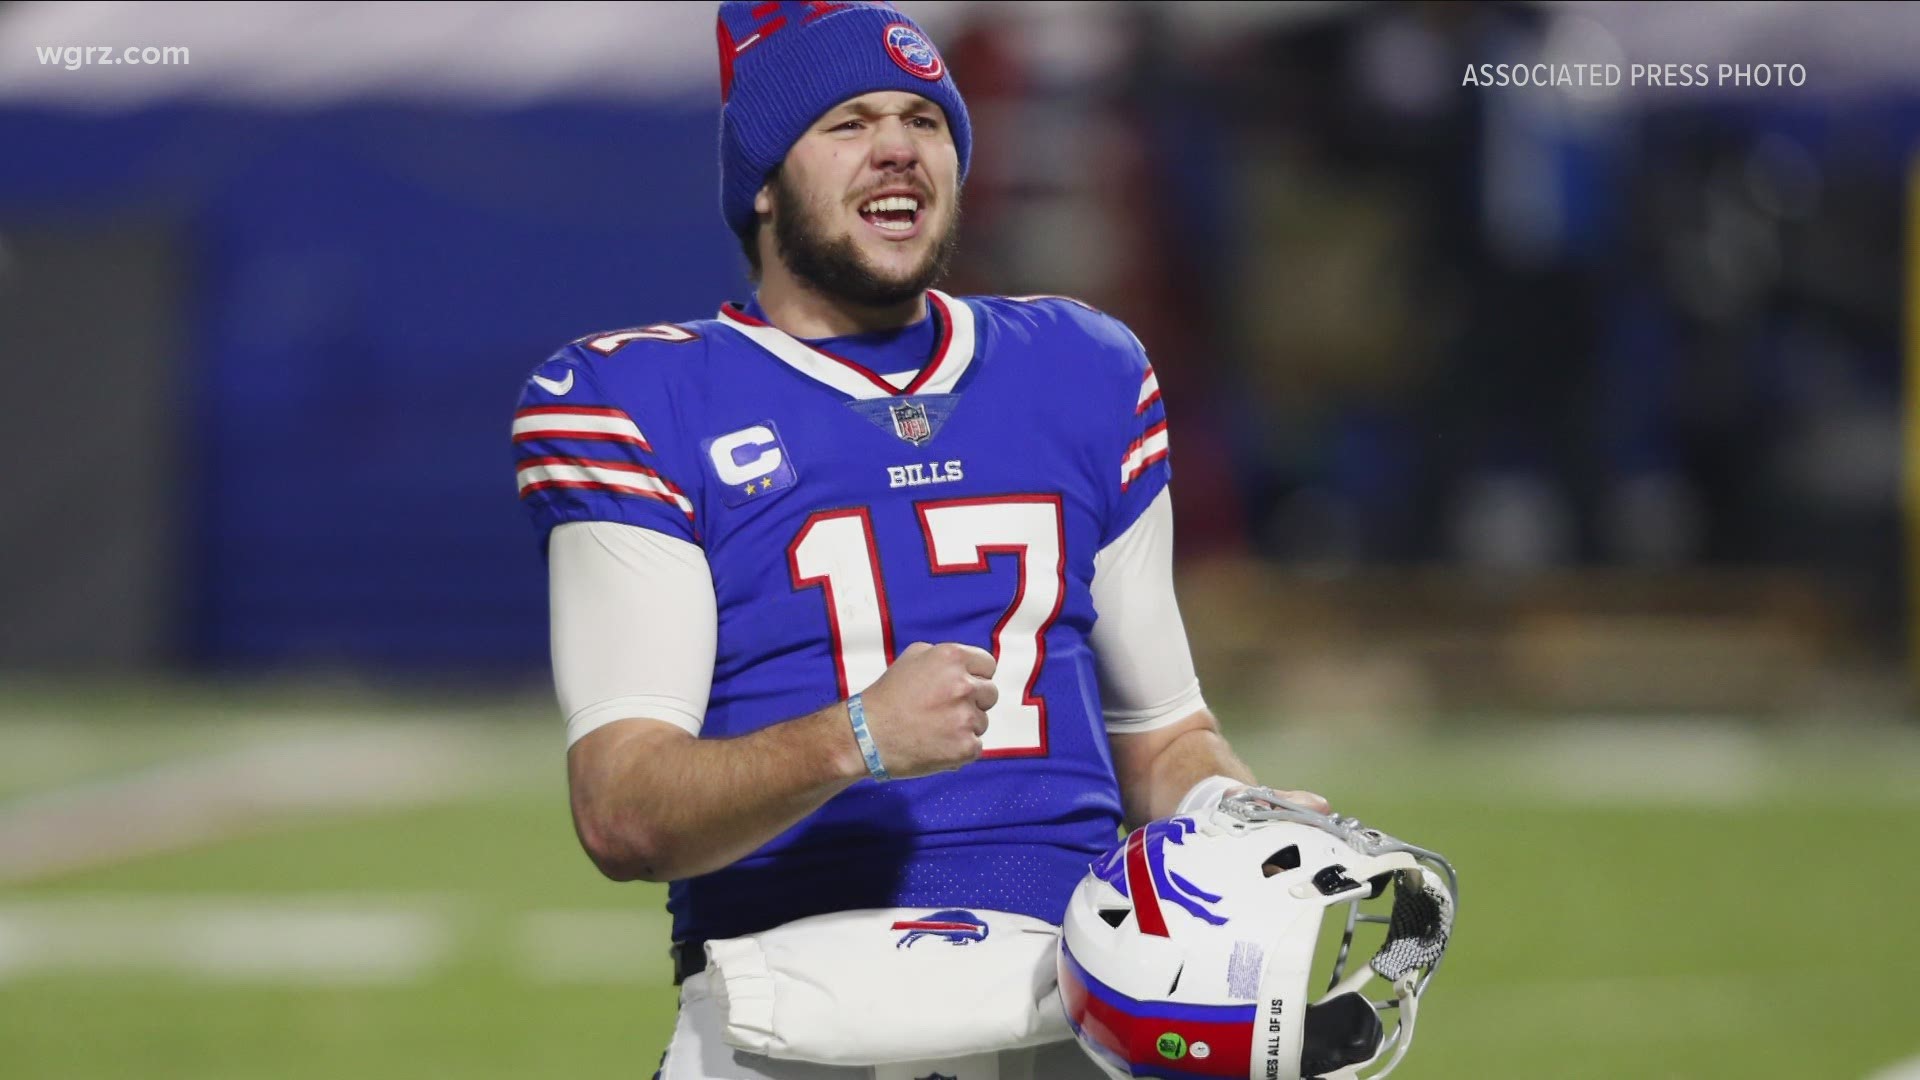 Allen shows he has a strong arm and strong will in leading the Bills to a win over the Ravens in a blustery Orchard Park on Saturday night.